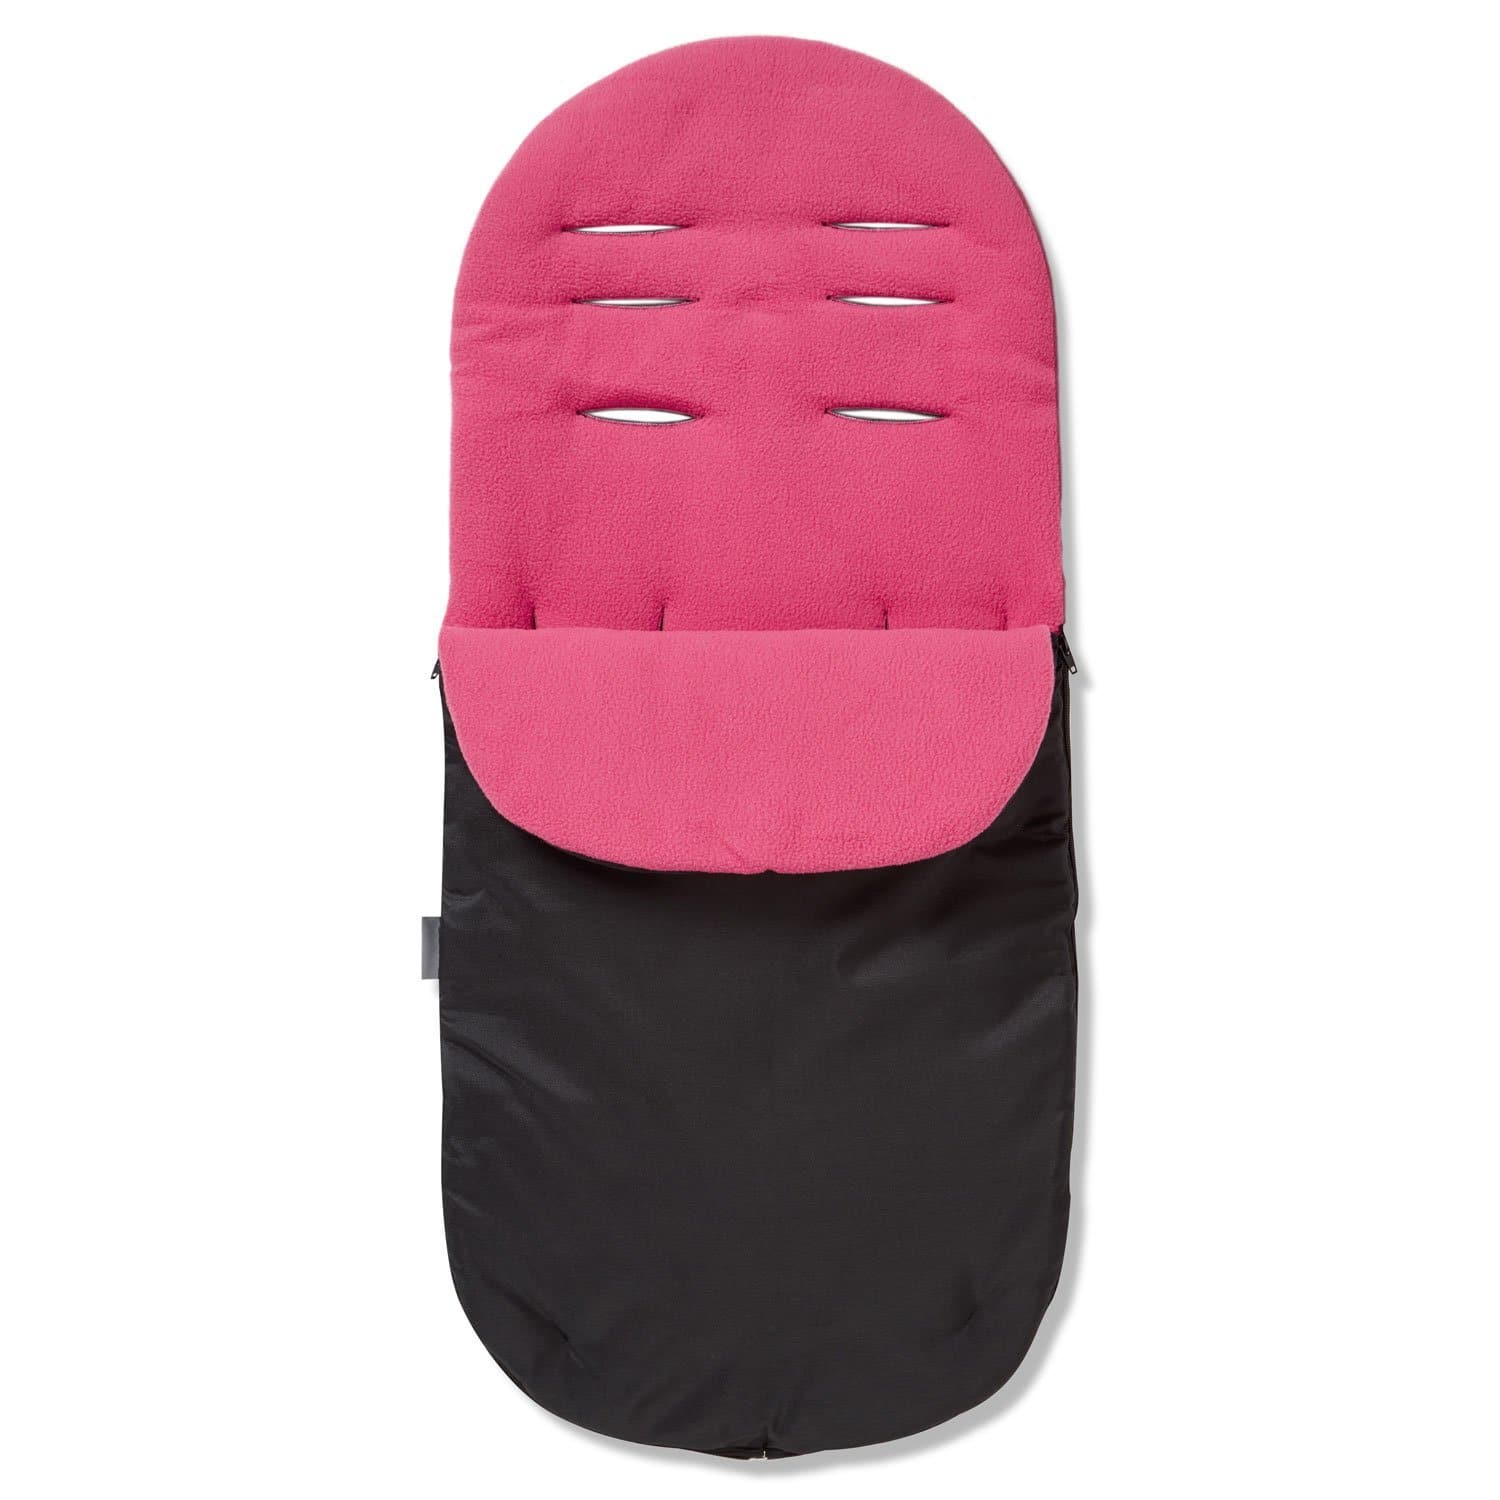 Footmuff / Cosy Toes Compatible with BabyDan - Dark Pink / Fits All Models | For Your Little One